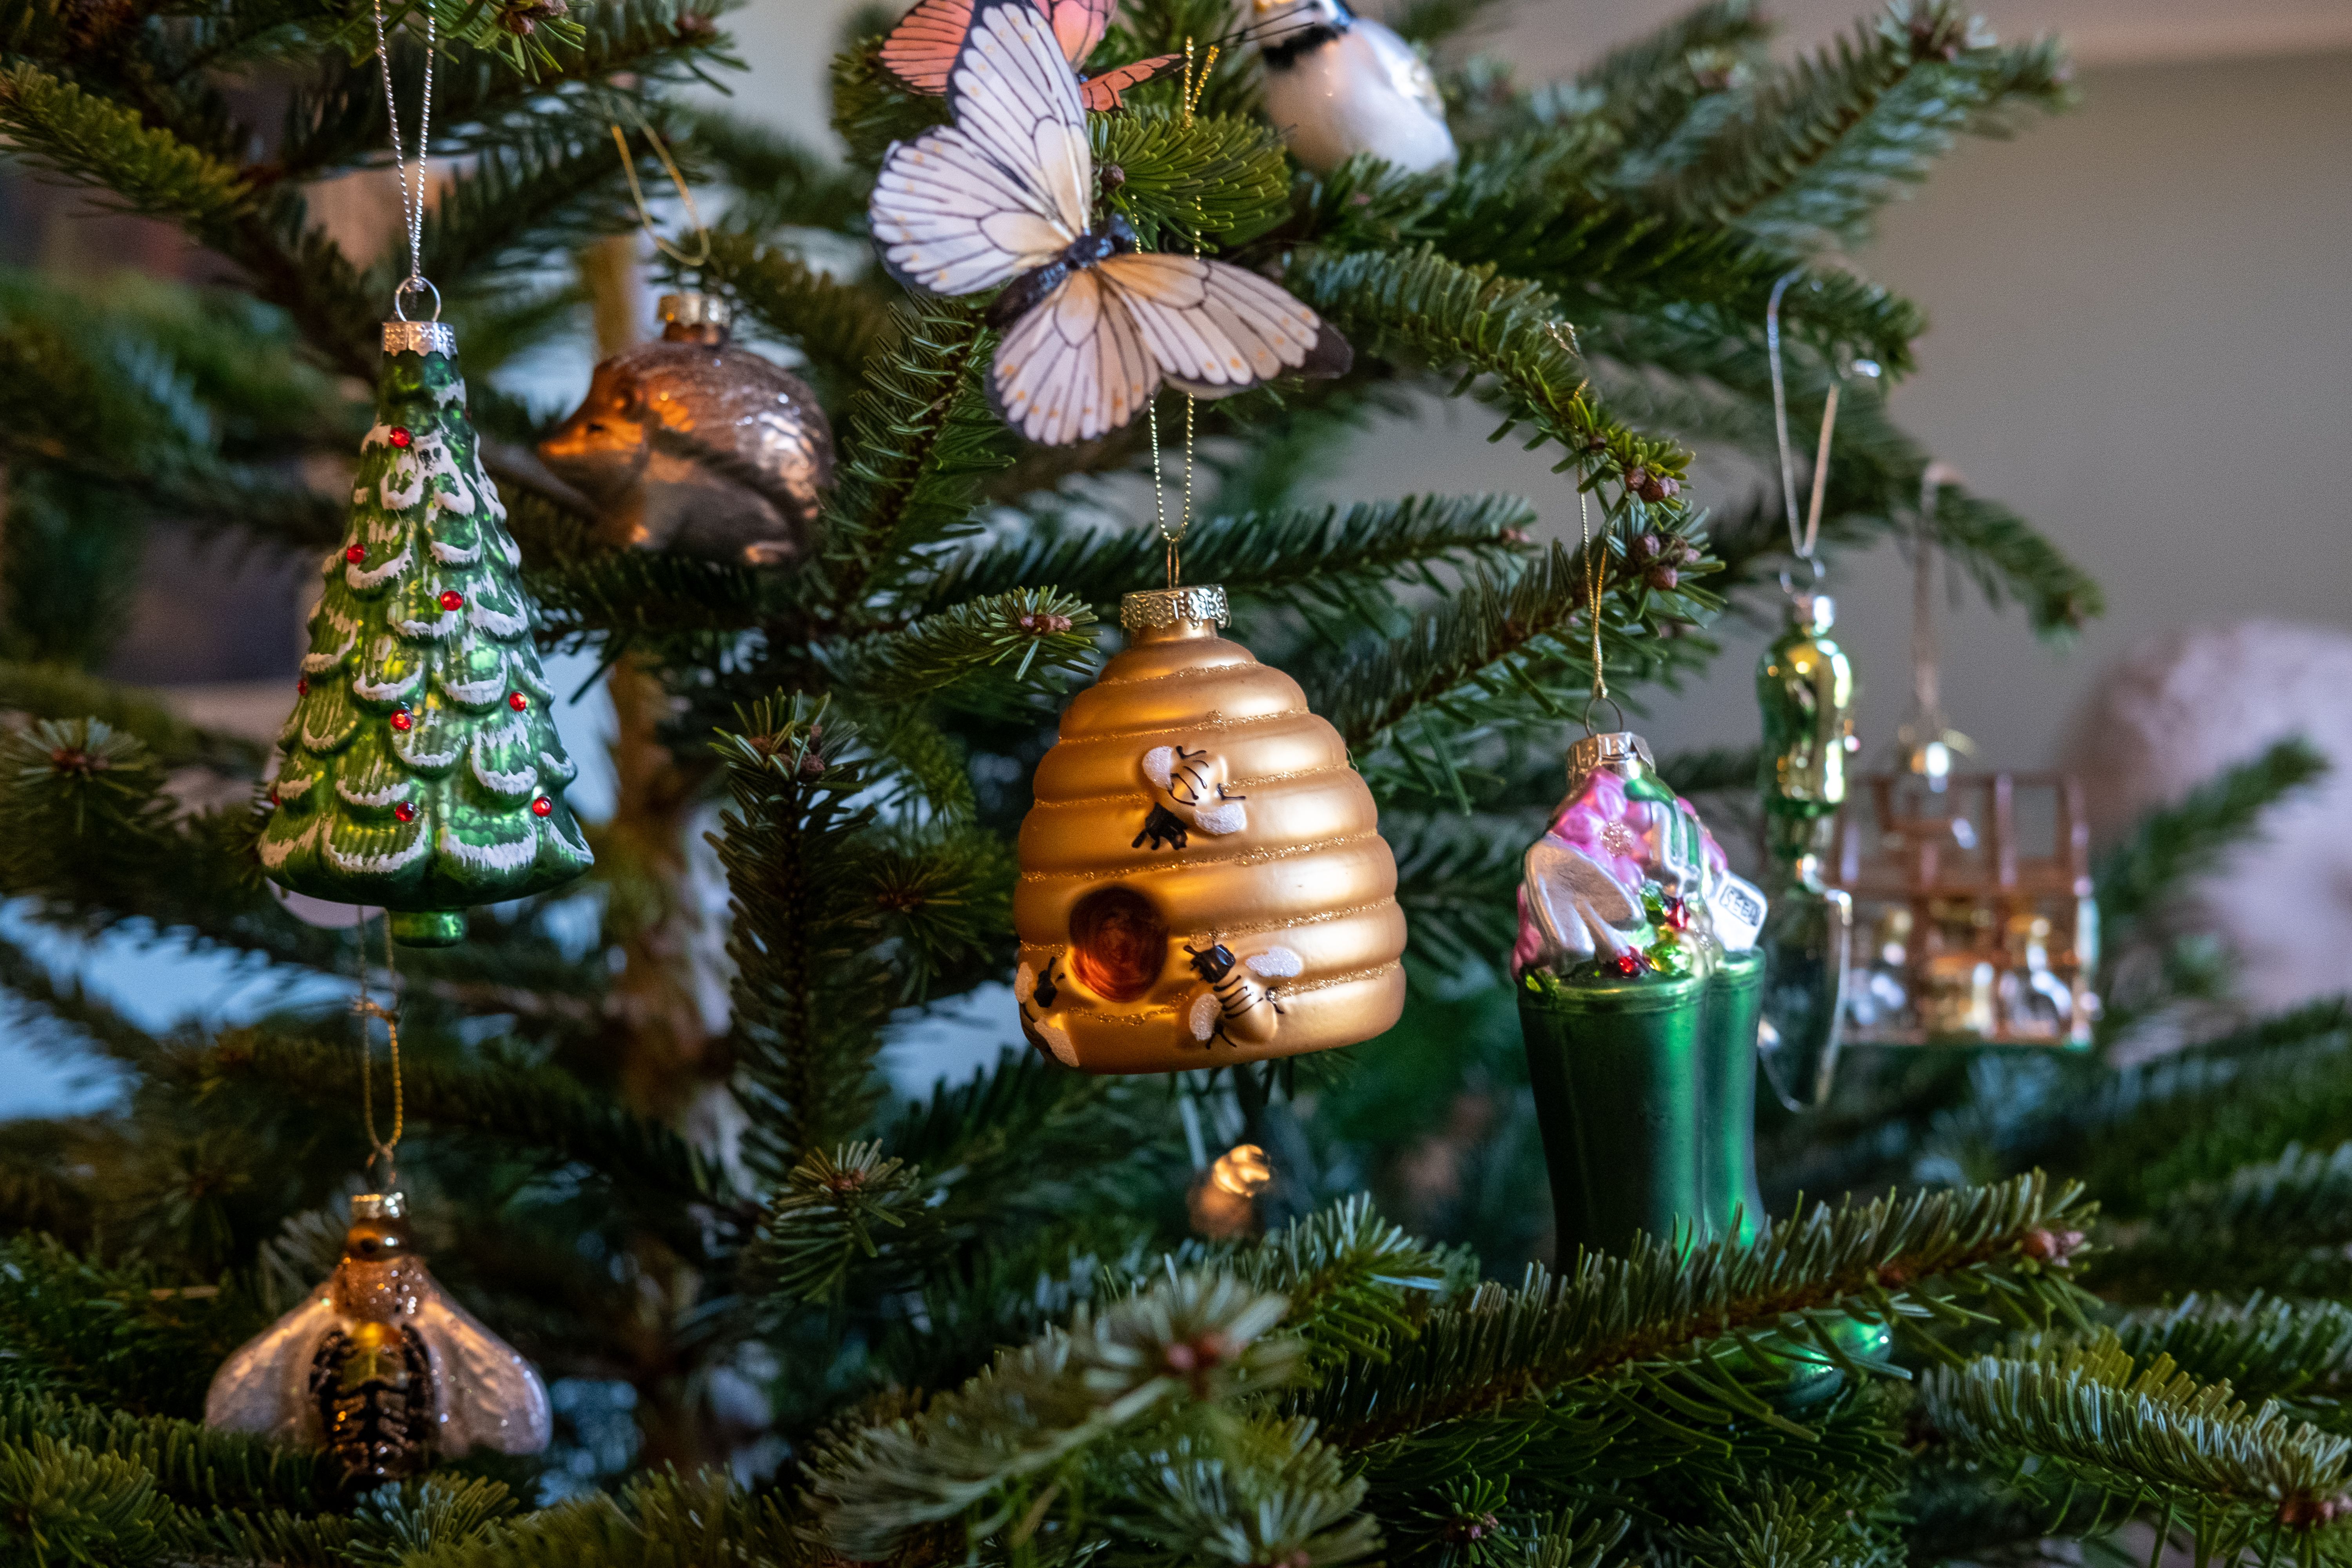 Festive Decorations - tree trims, garlands and much more...